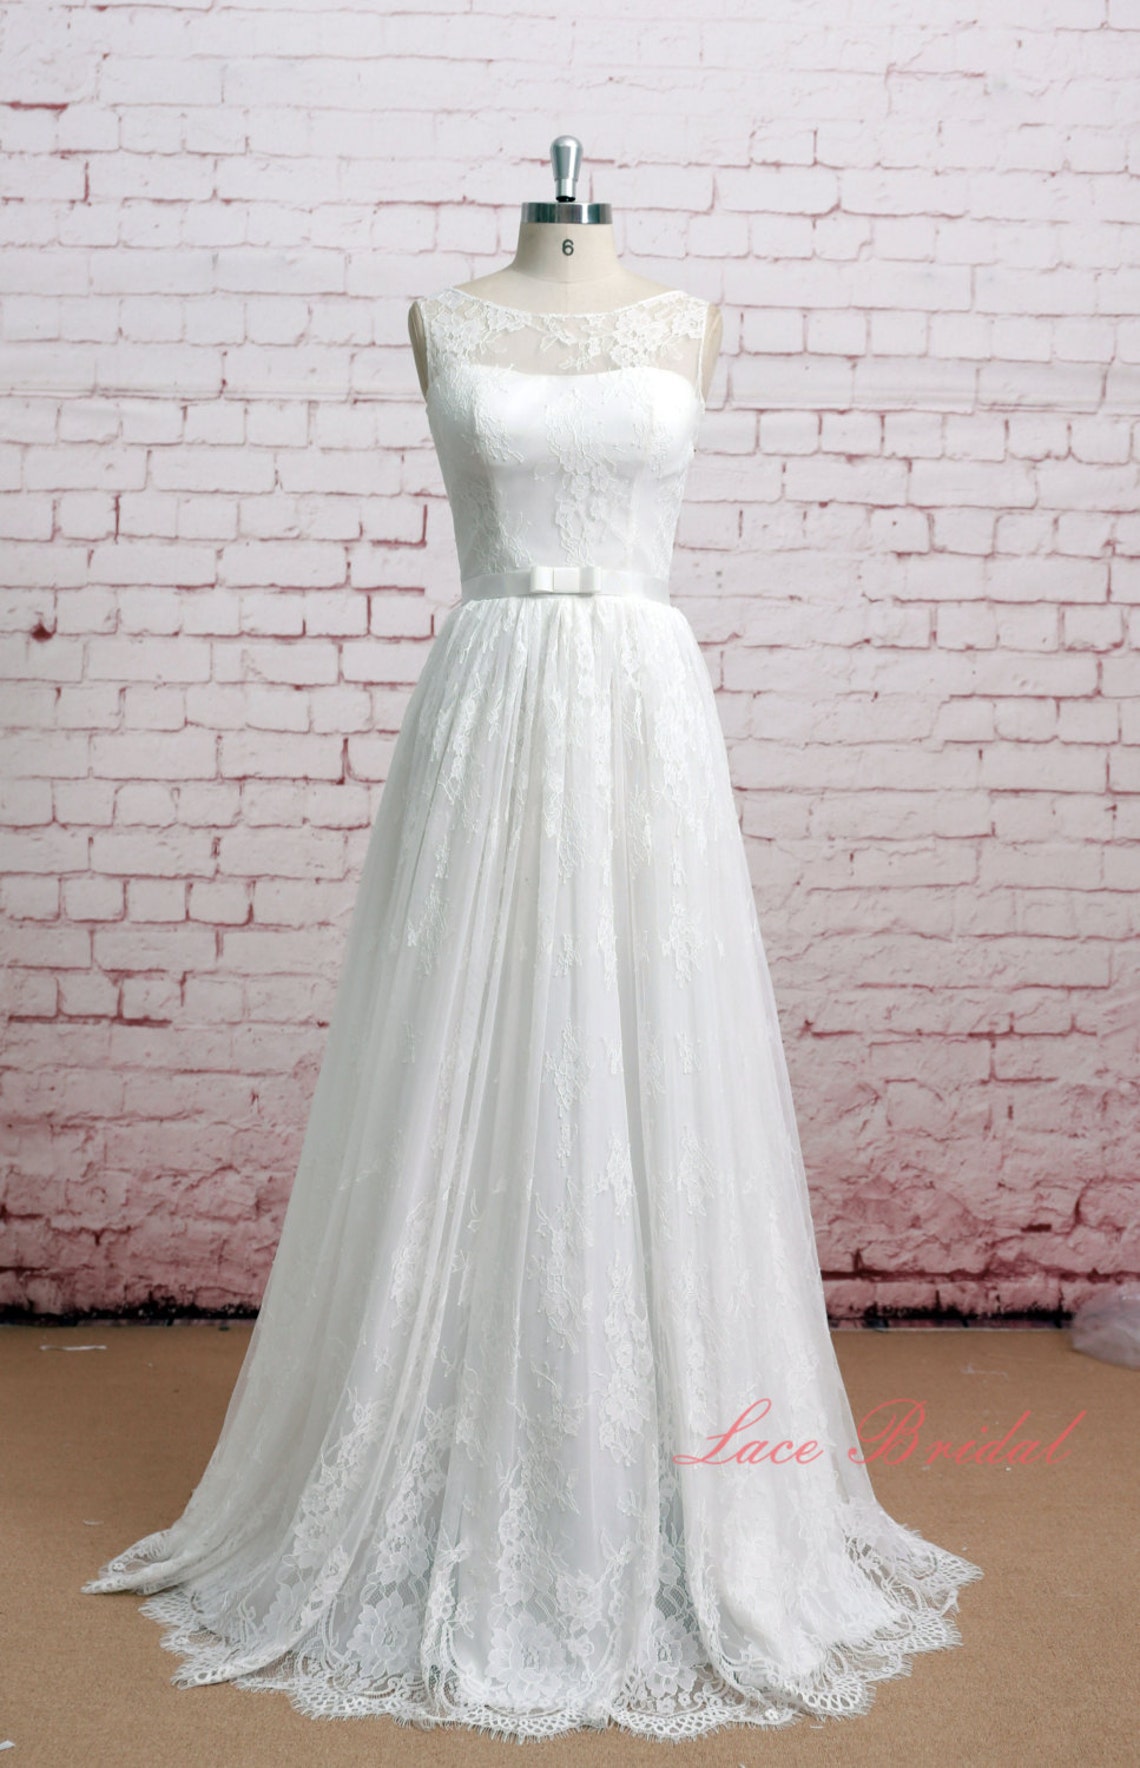 Ivory A Line Soft Full Lace Wedding Dress With Waistband - Etsy